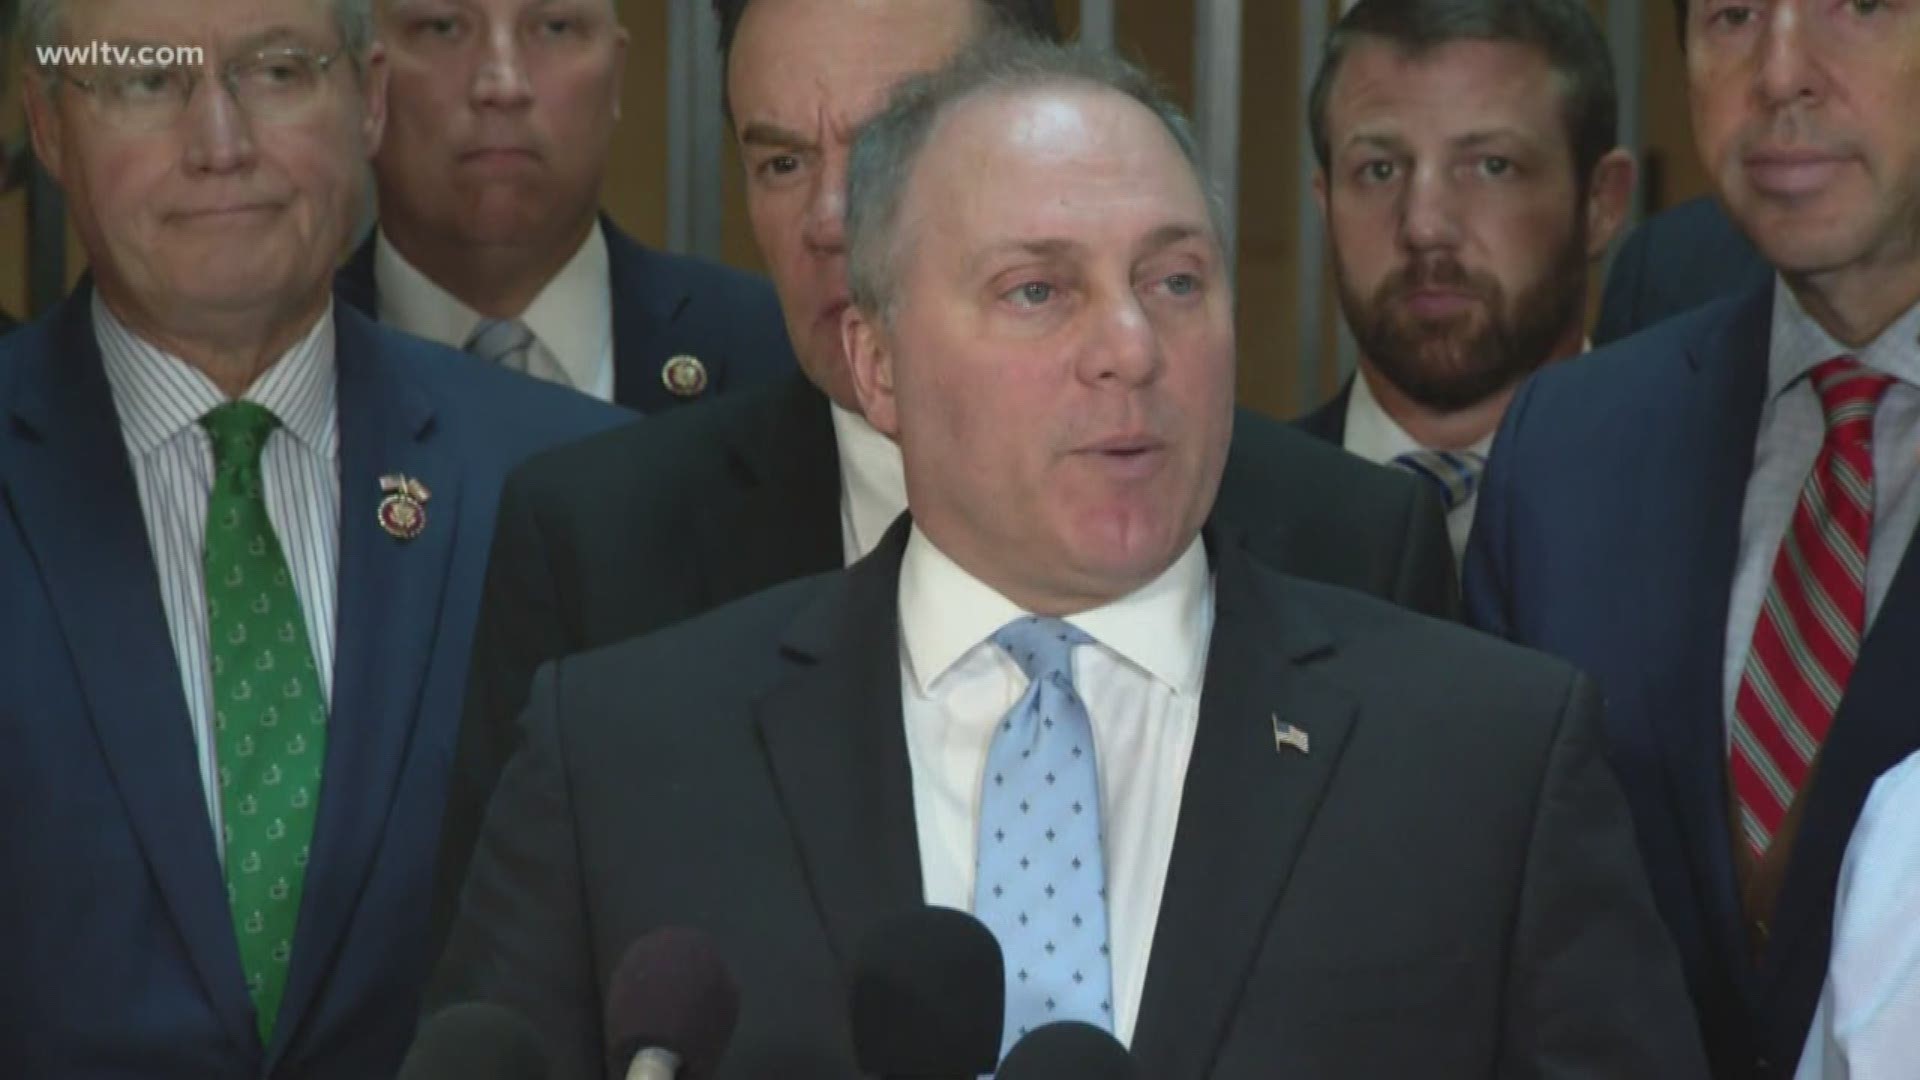 Louisiana Congressman Steve Scalise has been very public about criticizing how Democrats are proceeding with the inquiry.